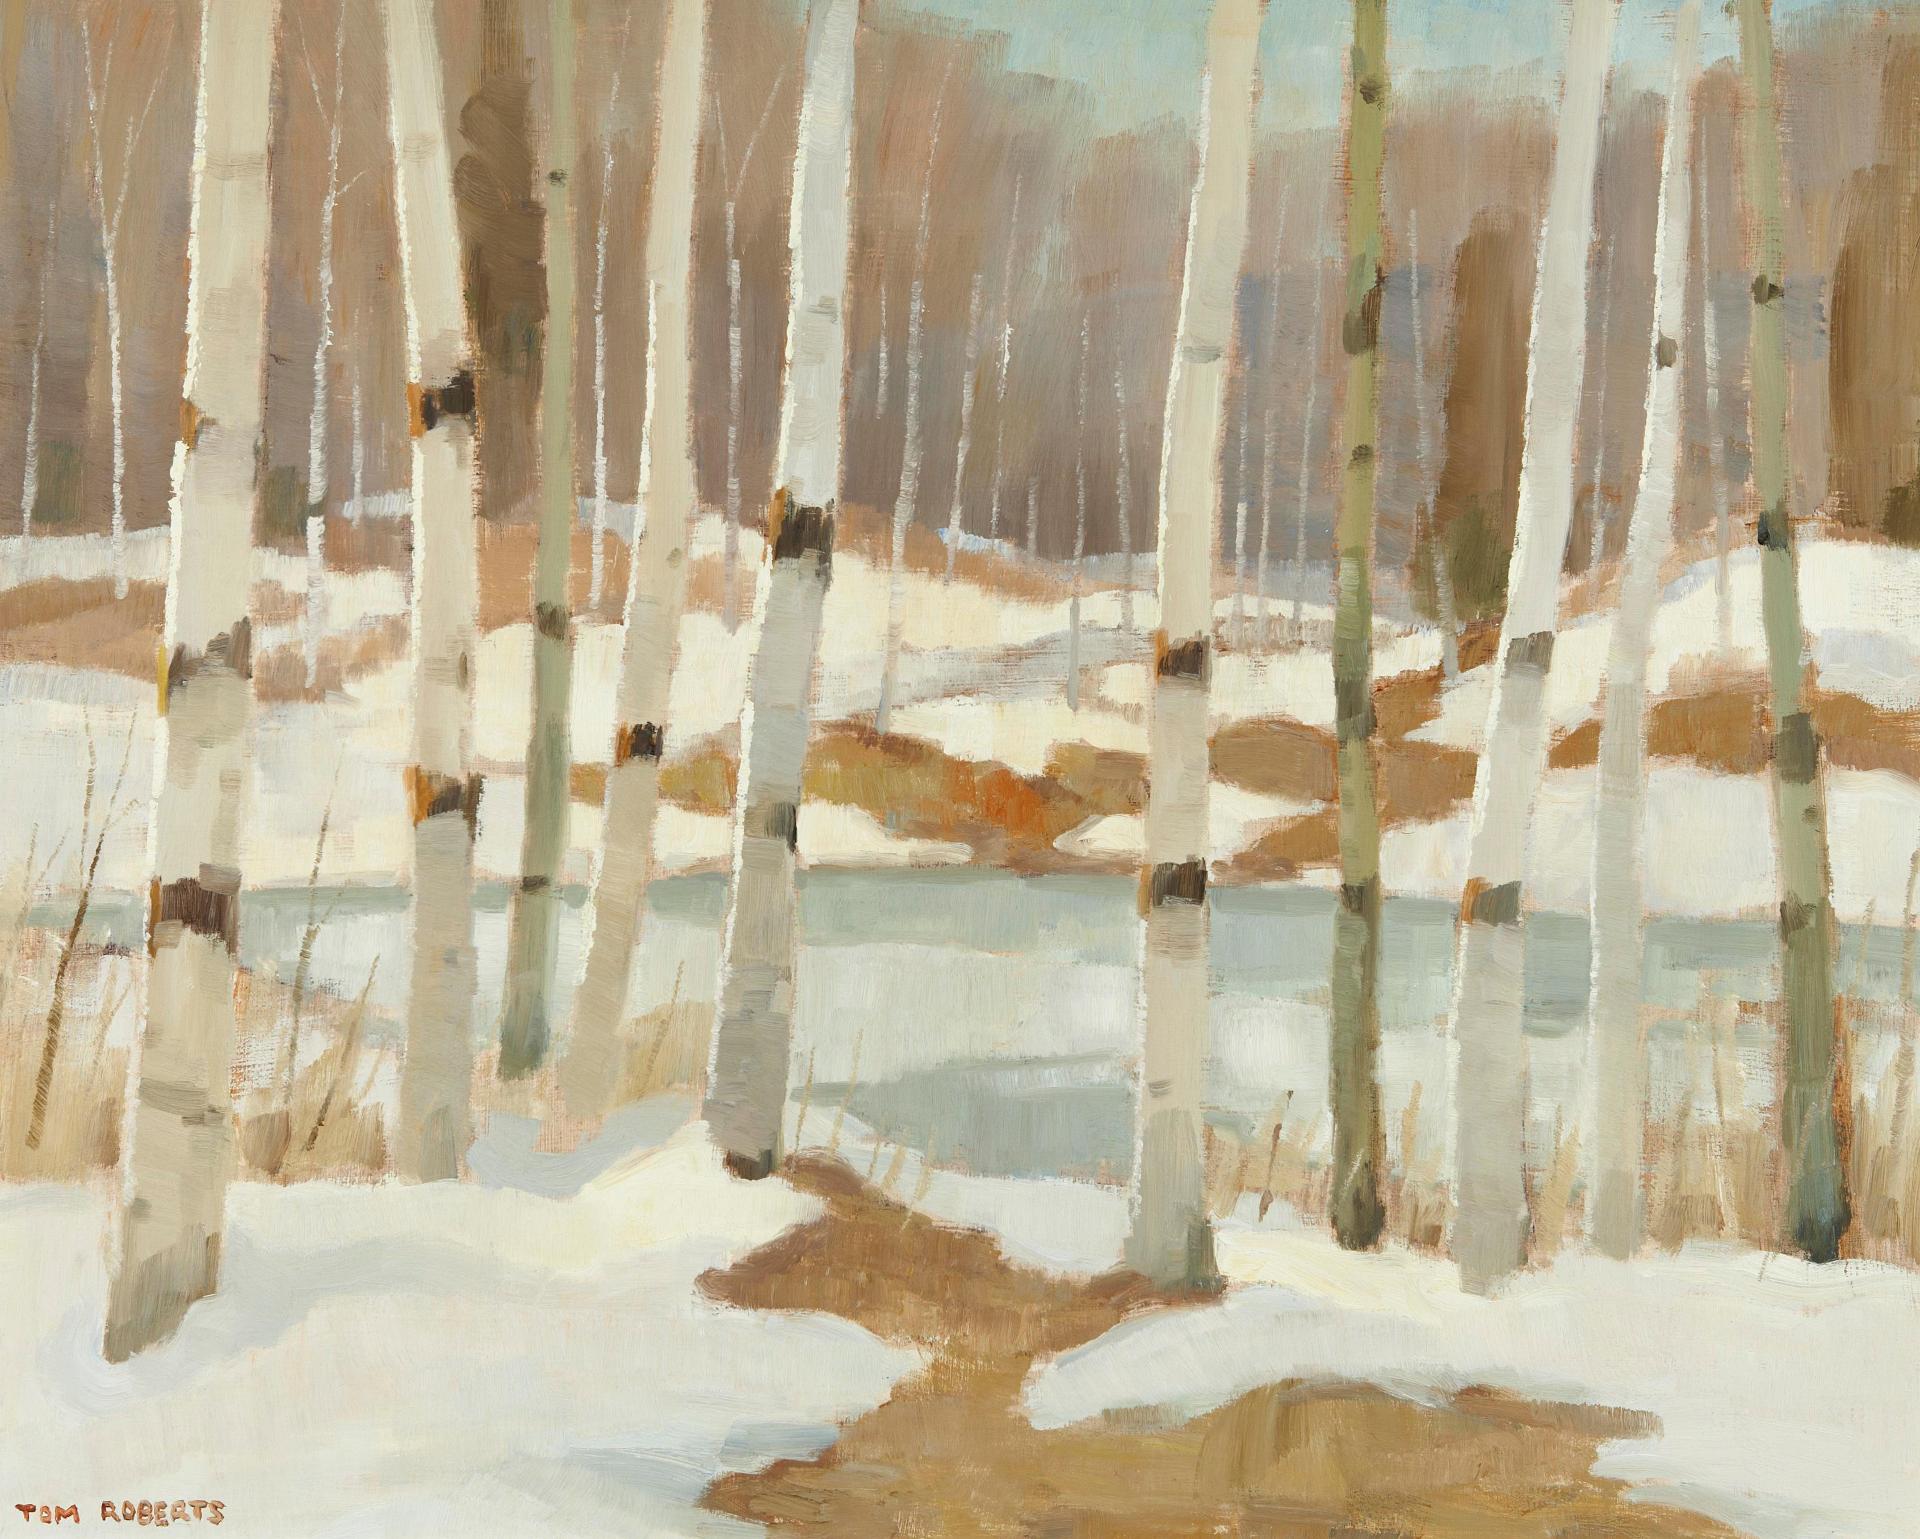 Thomas (1909-1998) - The Birch Woods Pond in March